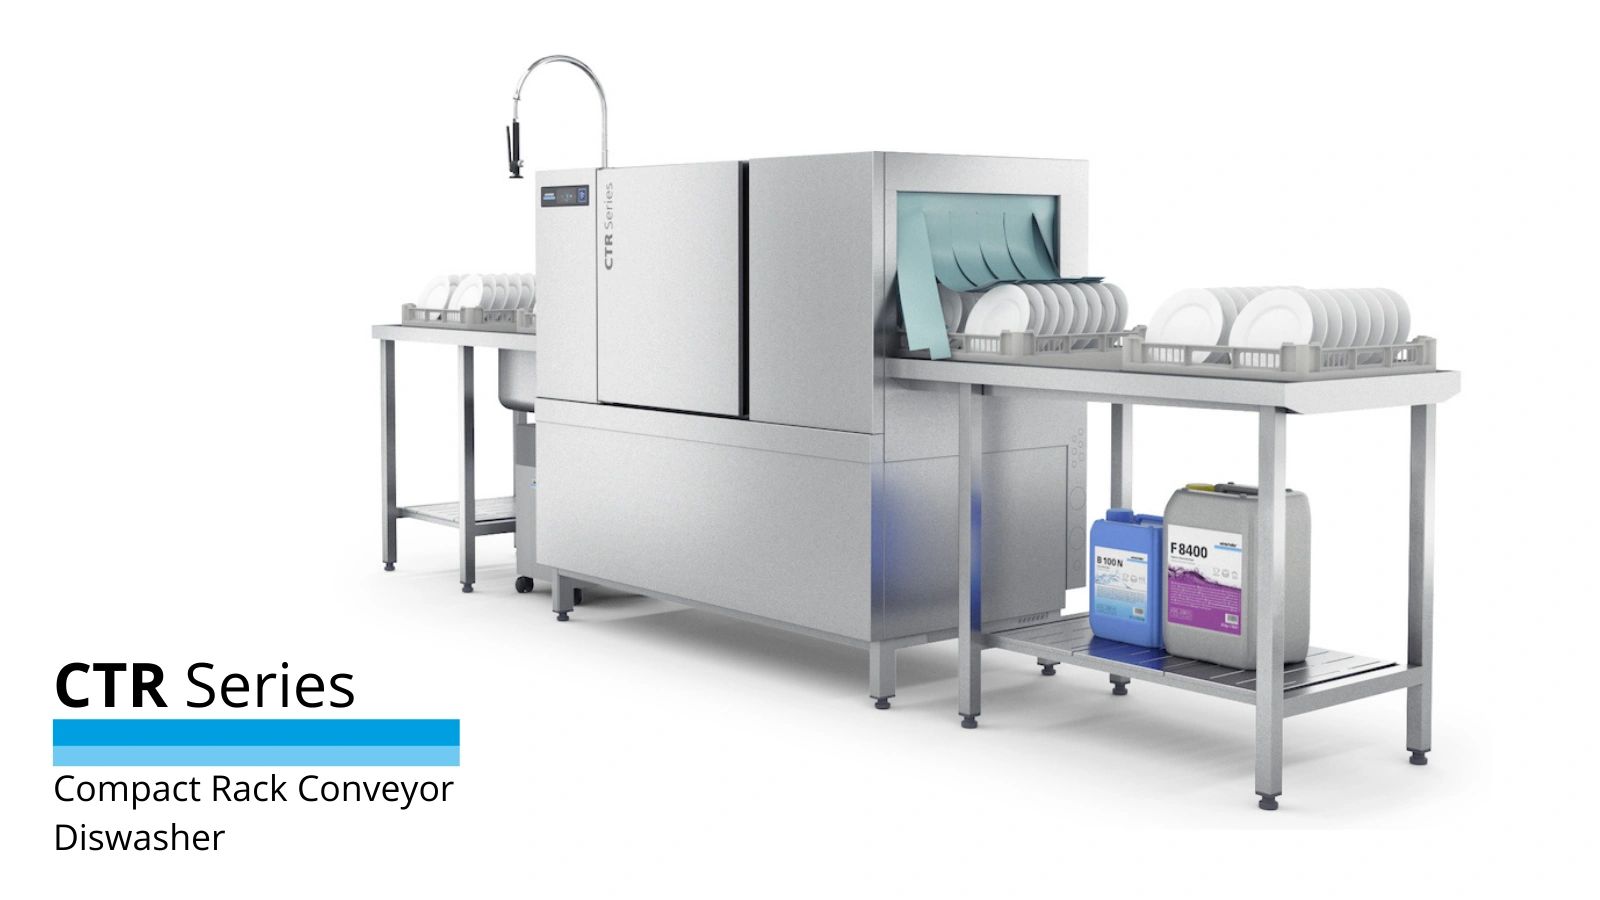 Bottle Washer - Hospitality Innovations by Quorate Inc.